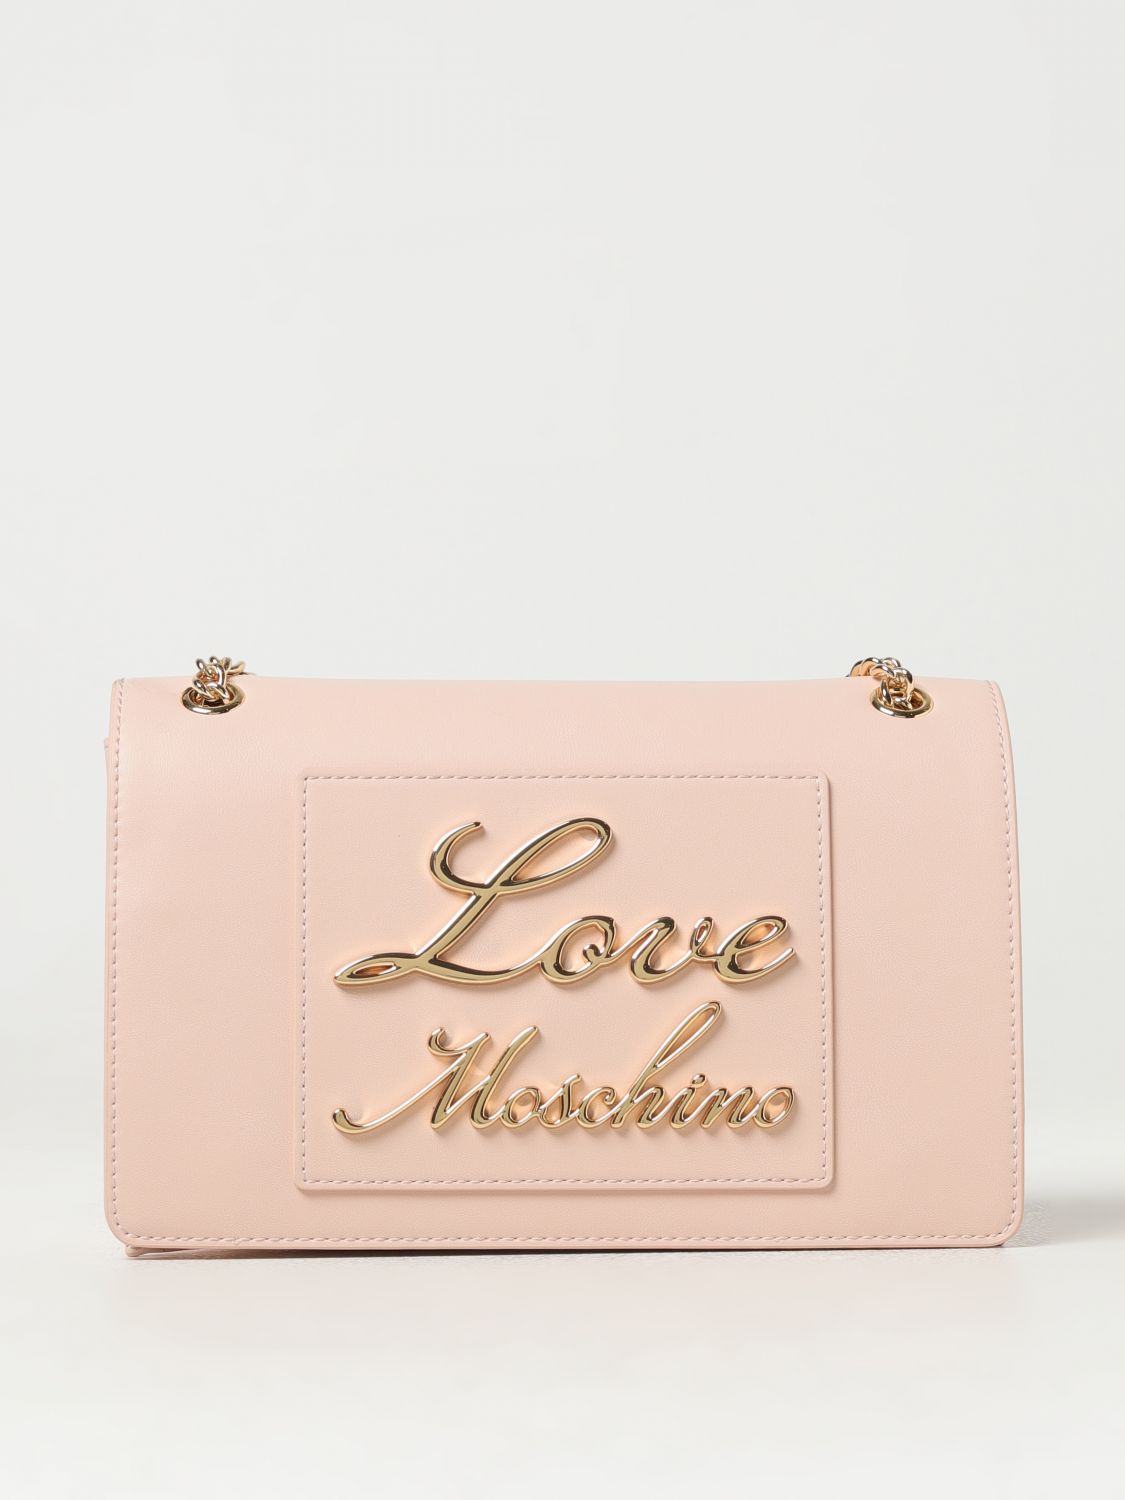 Love moschino bag with golden chain strap cross bag almost new | Moschino  bag, Cross bag, Chain strap